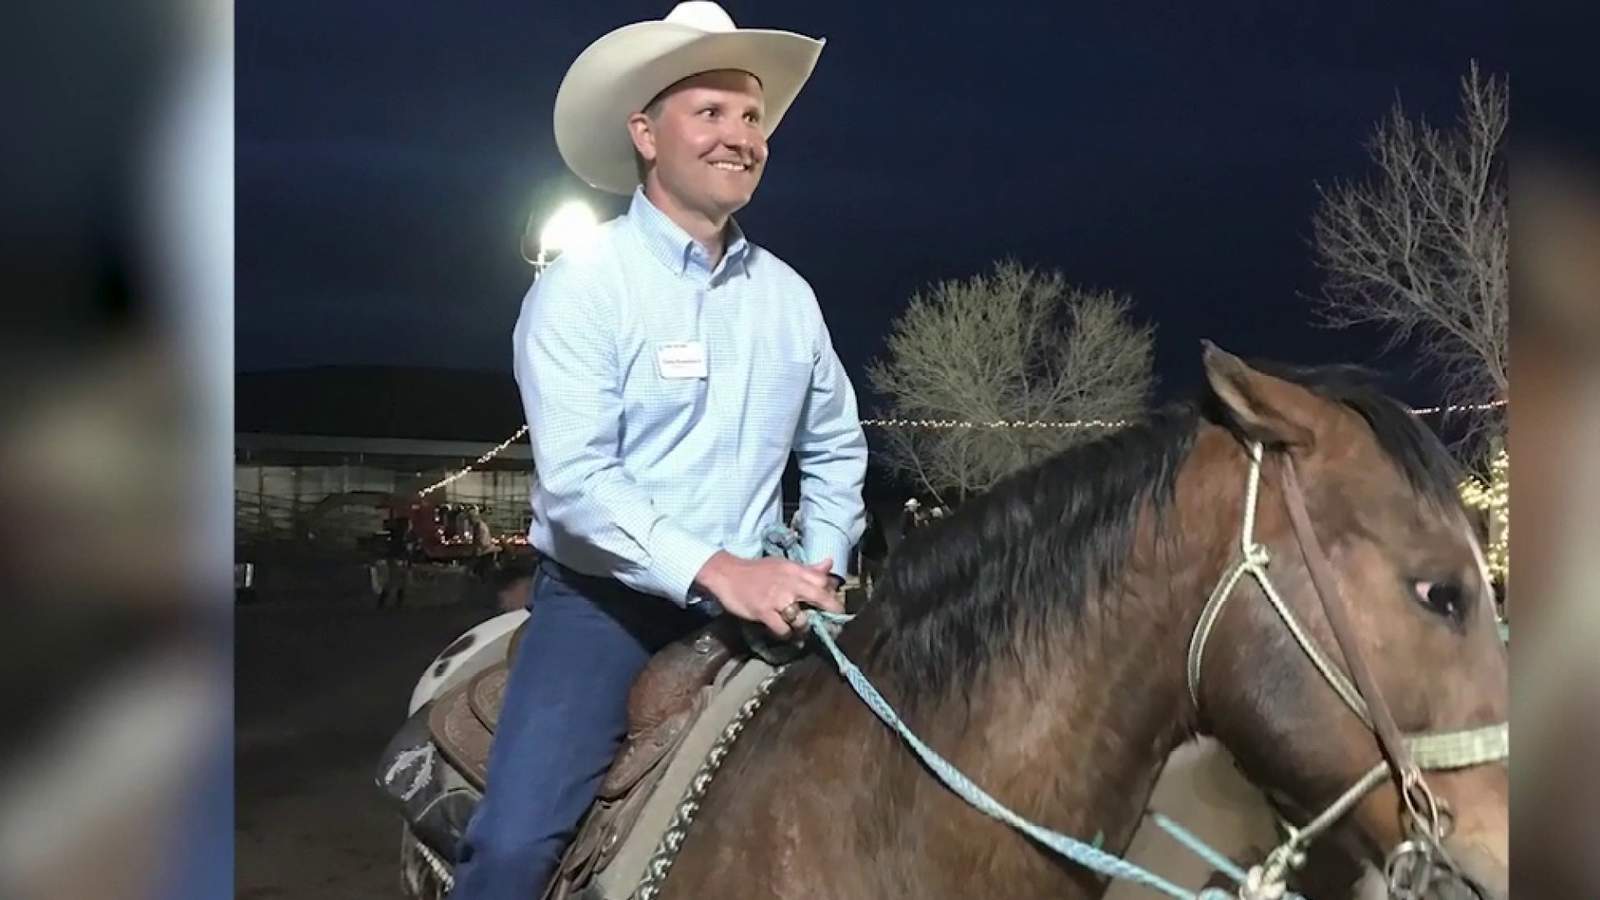 Rodeo spotlight: Scholarship recipient reminisces how the San Antonio Stock Show & Rodeo changed his life